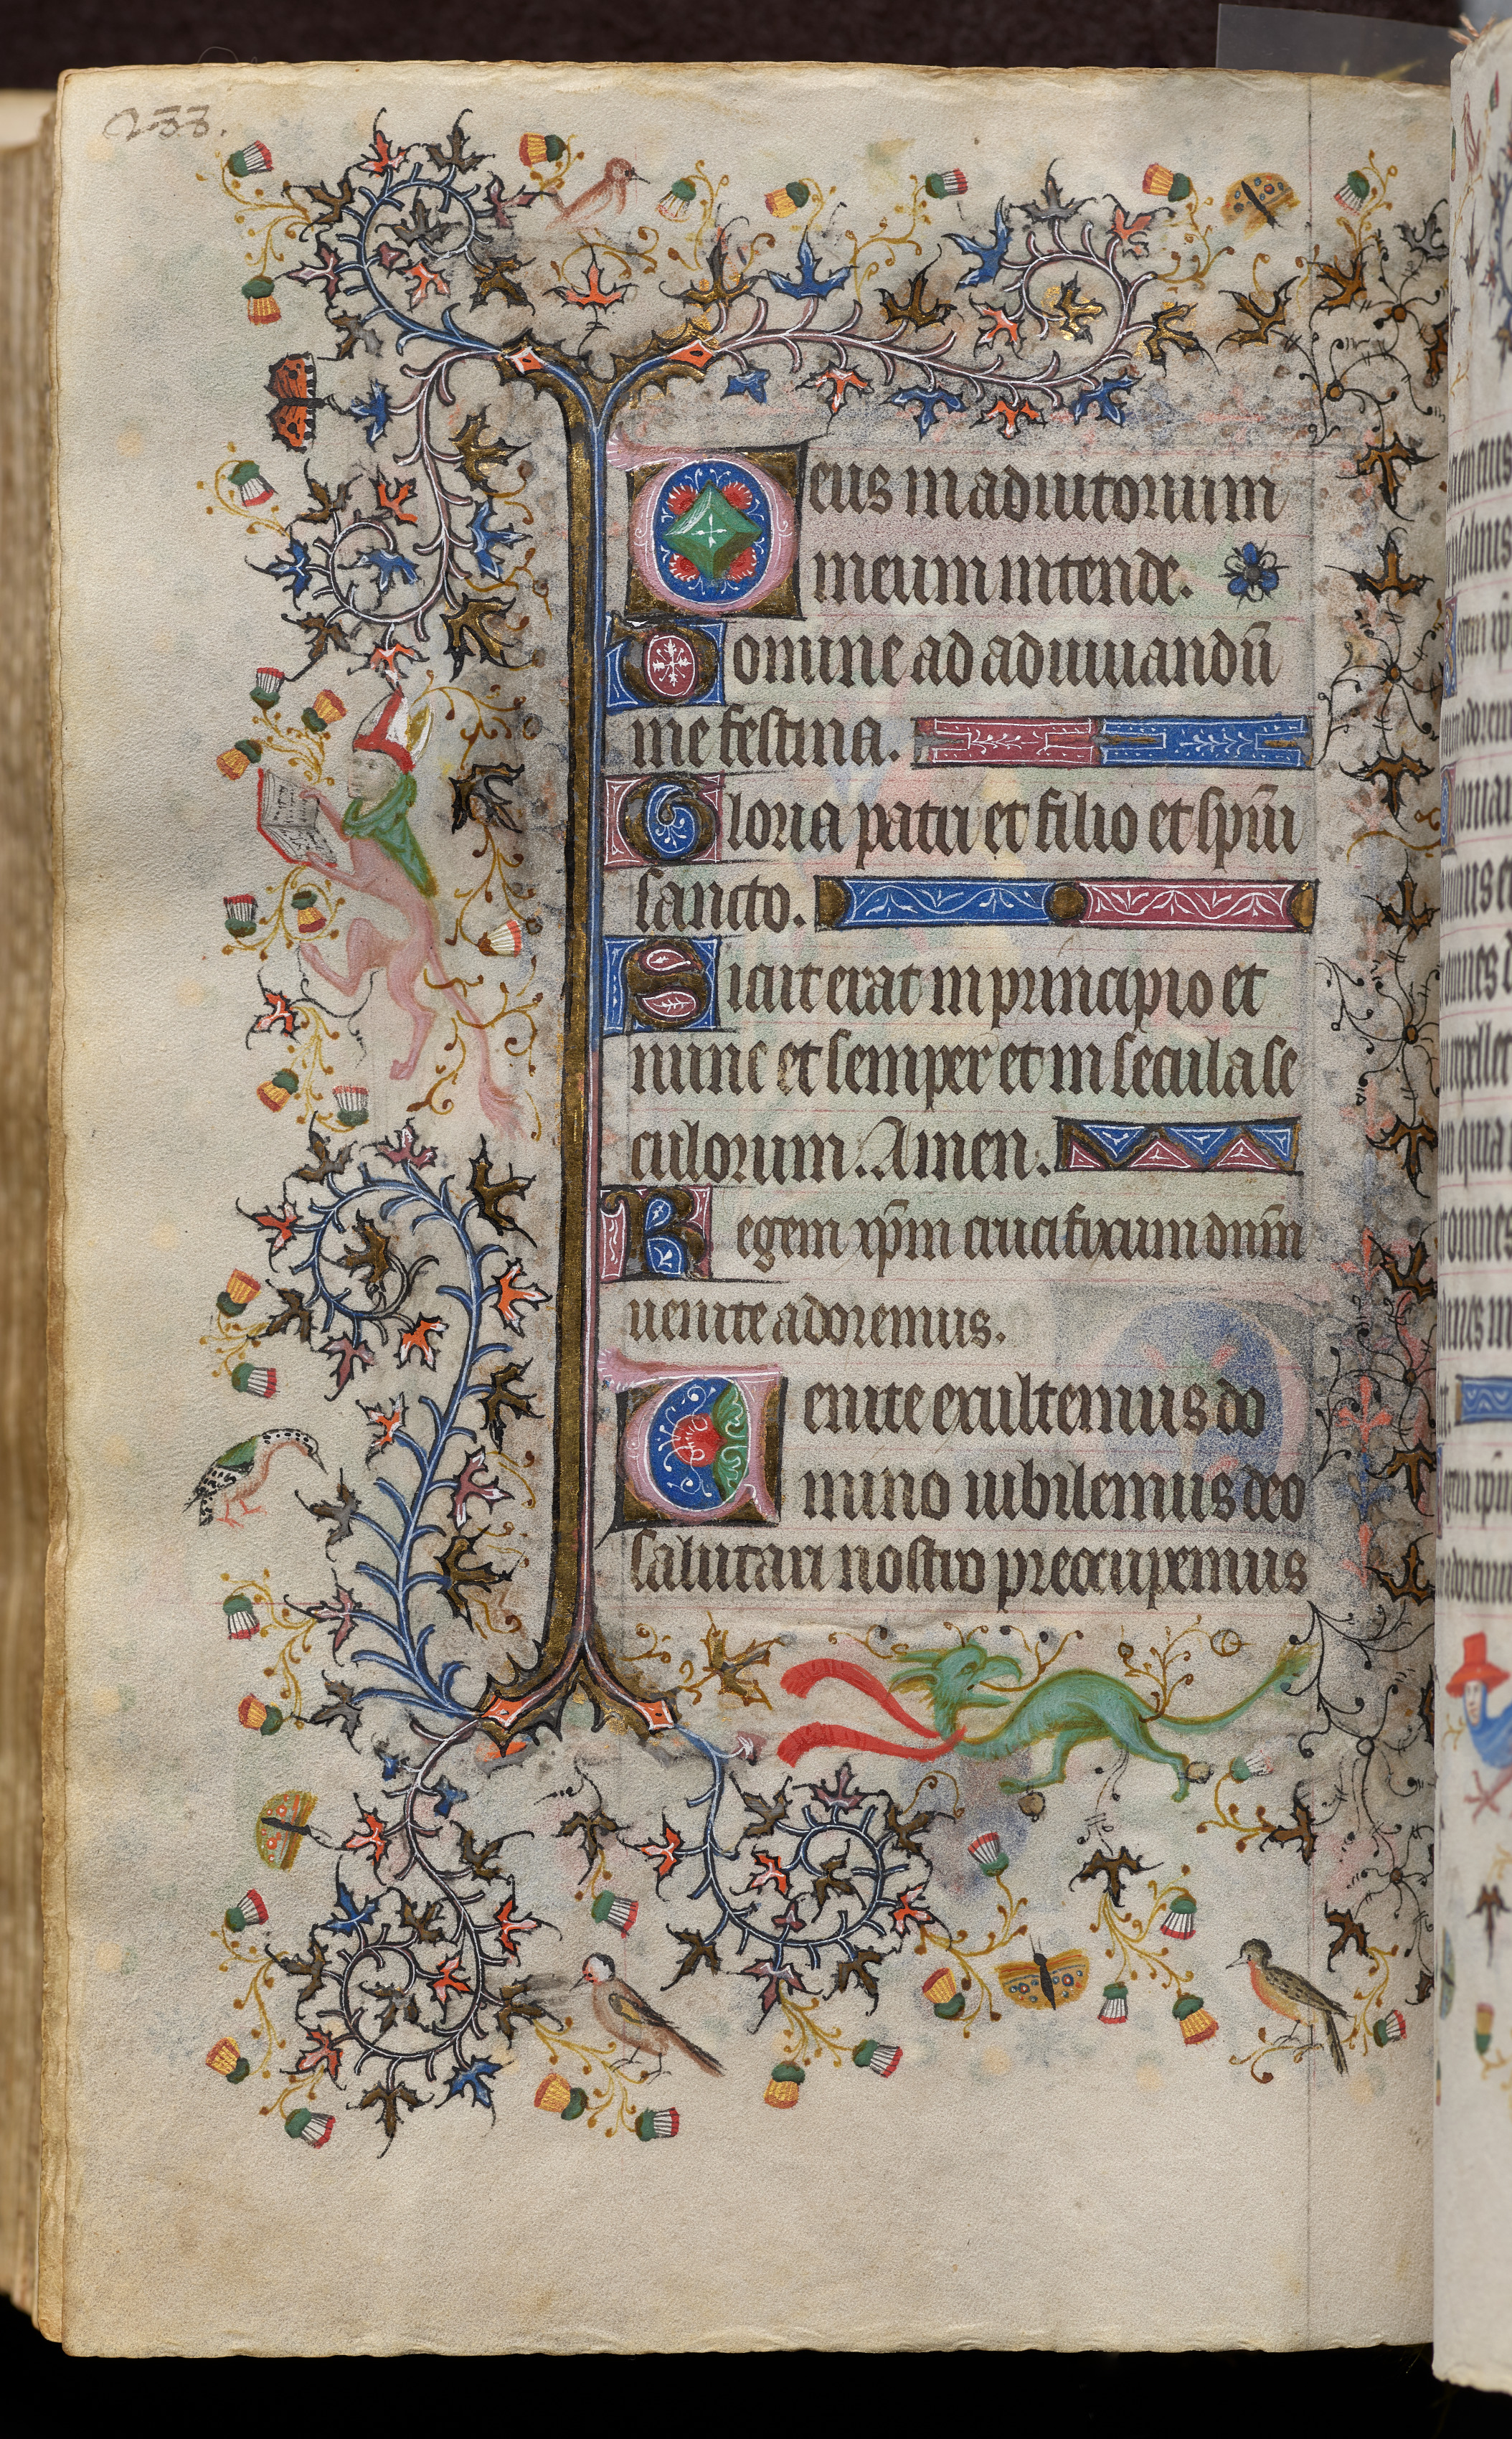 Hours of Charles the Noble, King of Navarre (1361-1425): fol. 144r, Text